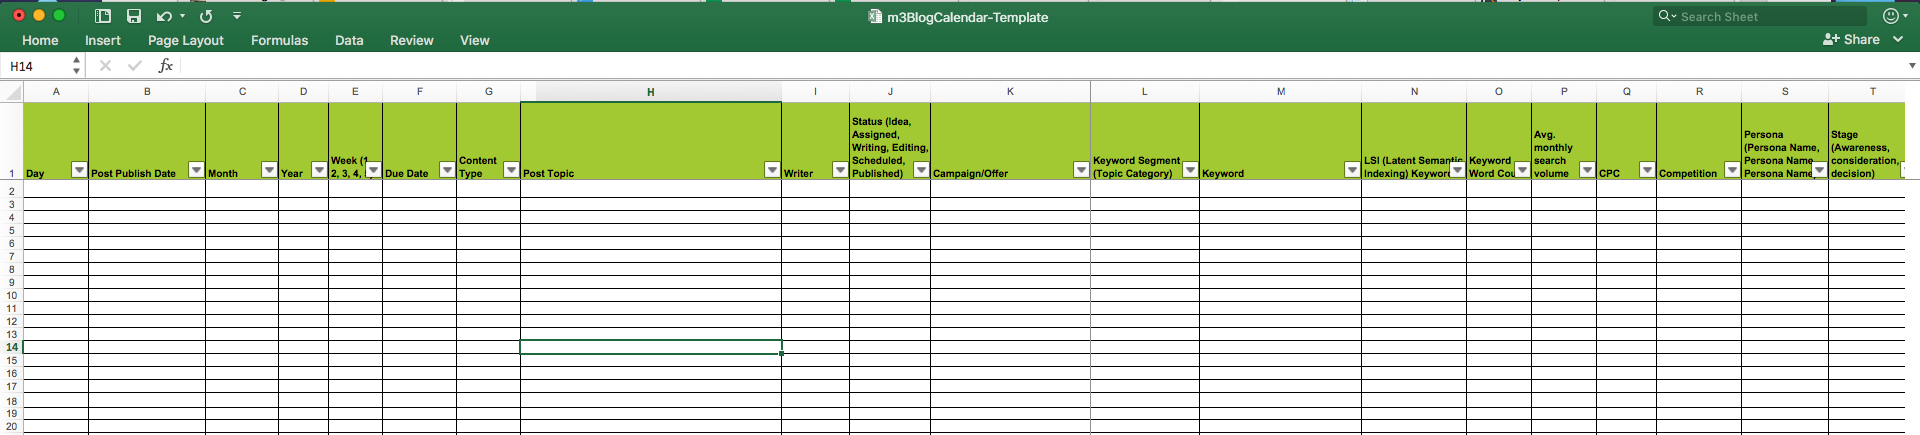 Monthly Calendar Spreadsheet within Editorial Calendar Templates For Content Marketing: The Ultimate List